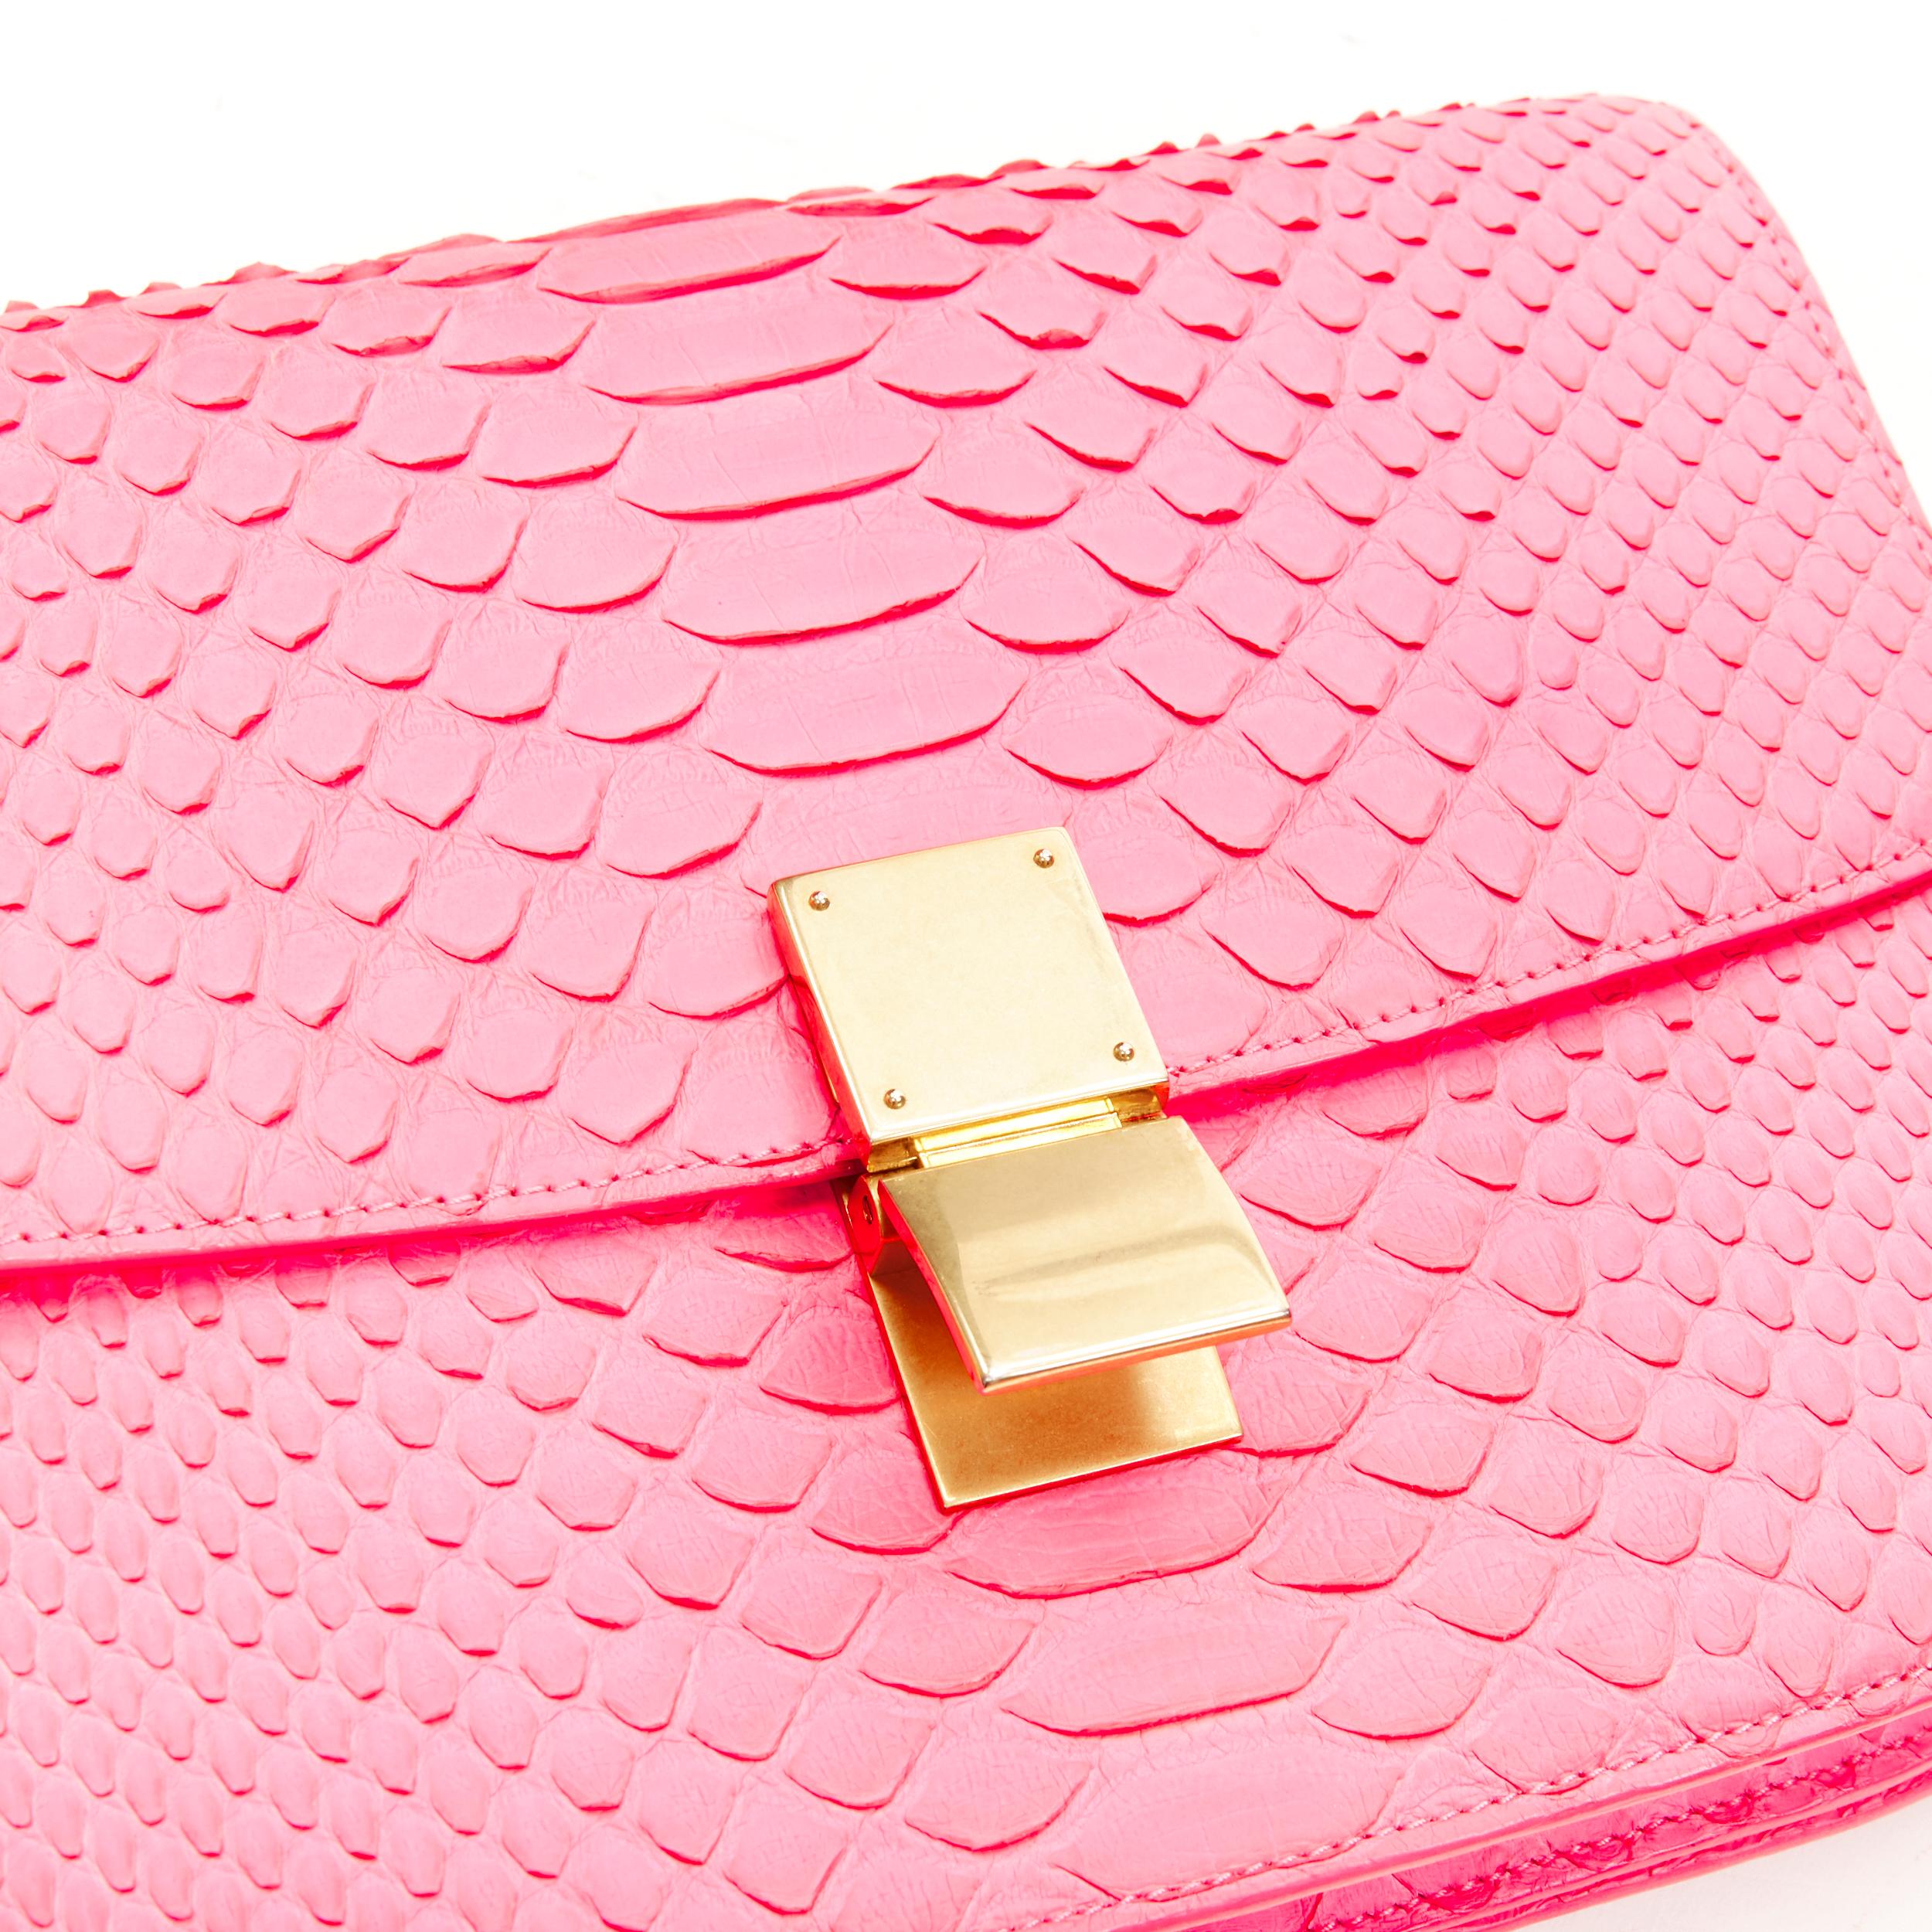 OLD CELINE Medium Classic Box Bag neon pink scaled leather flap crossbody For Sale 3